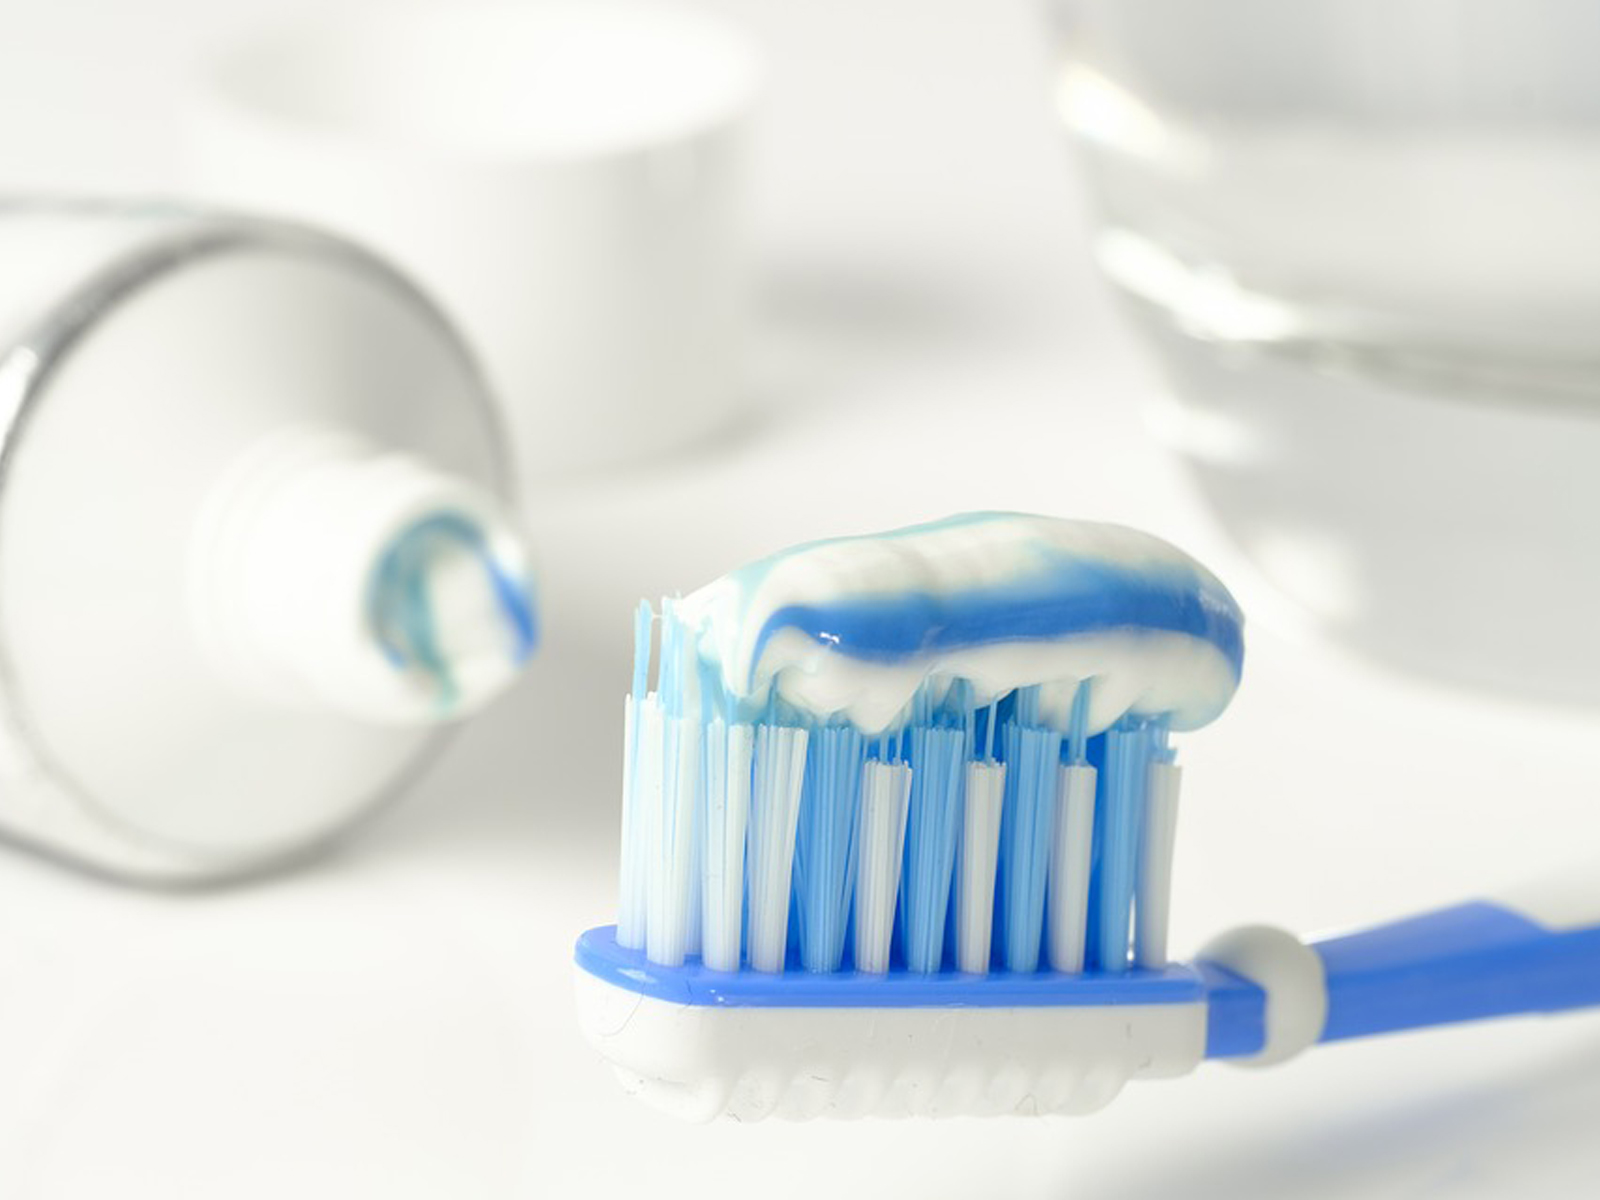 At What Age Should Kids Use Fluoride Toothpaste?